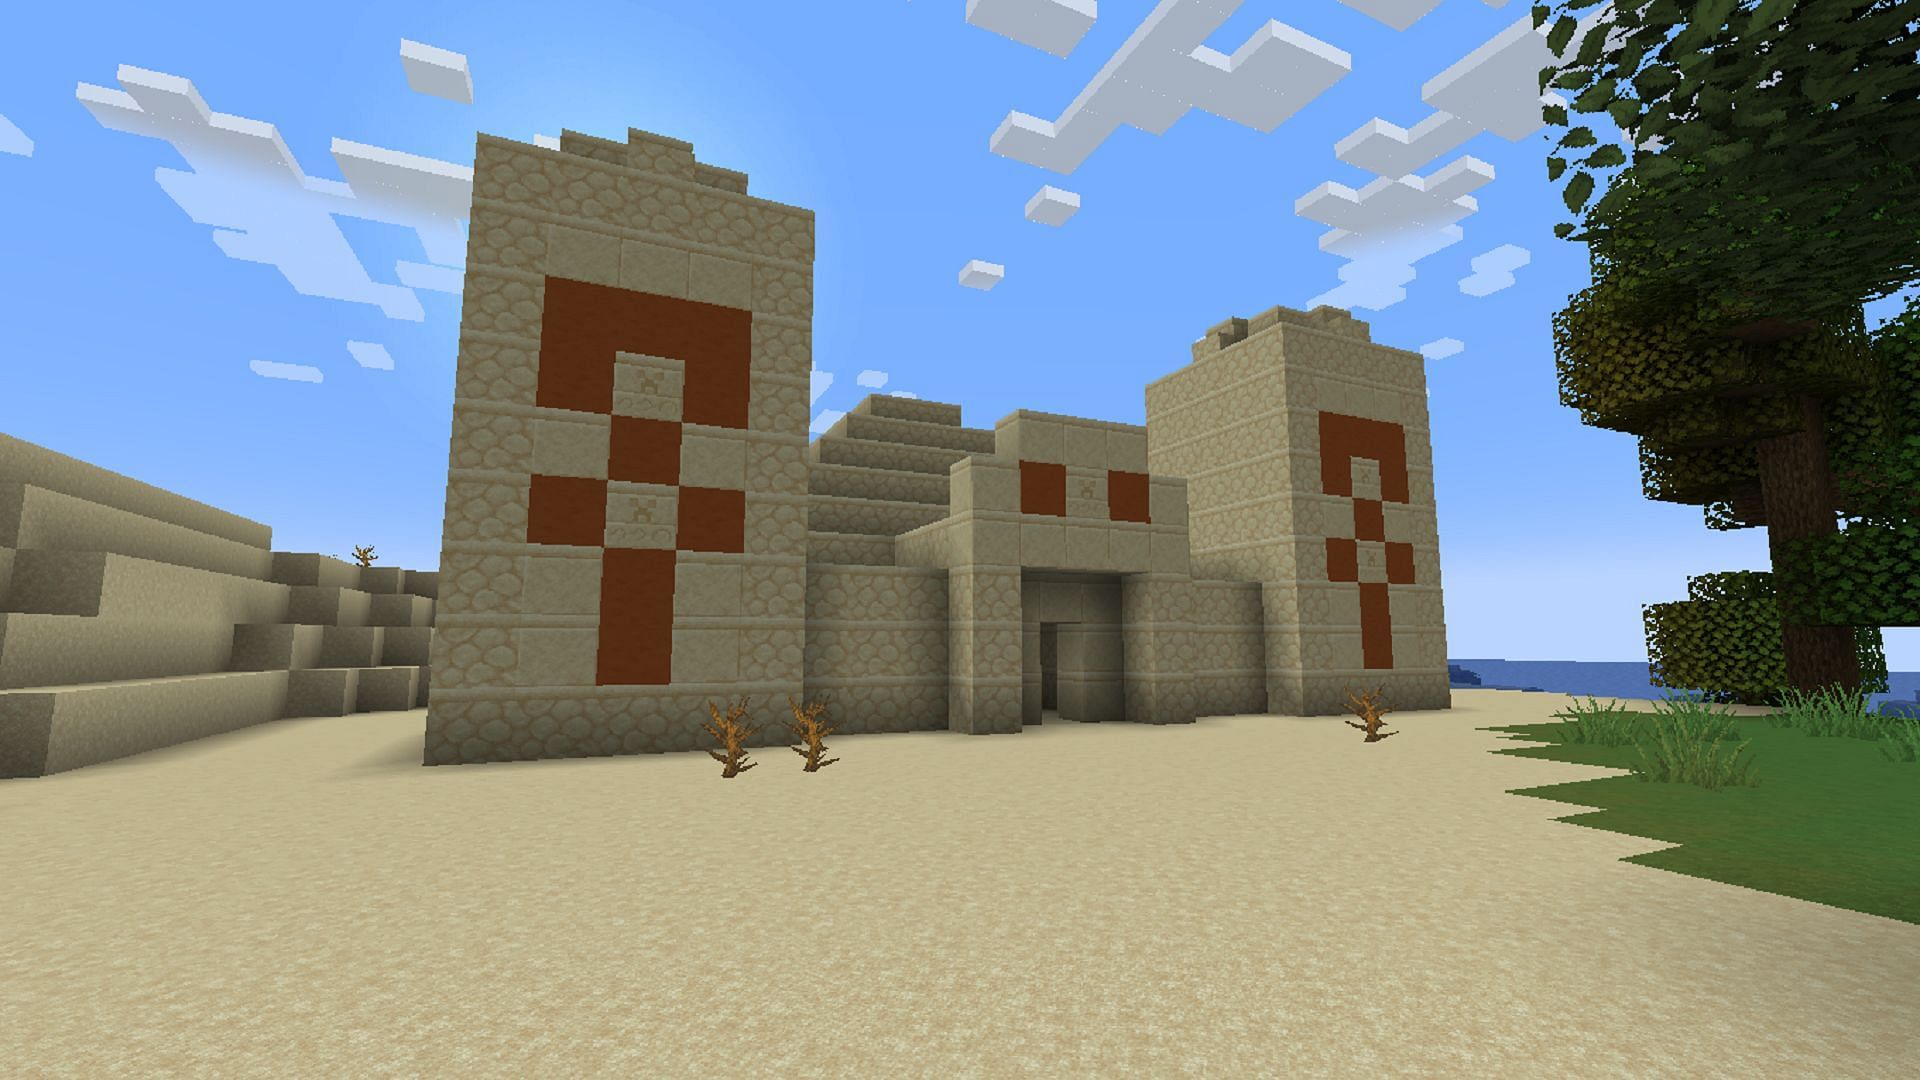 Desert pyramids are one location where pottery shards can be found in Minecraft&#039;s current previews (Image via Mojang)